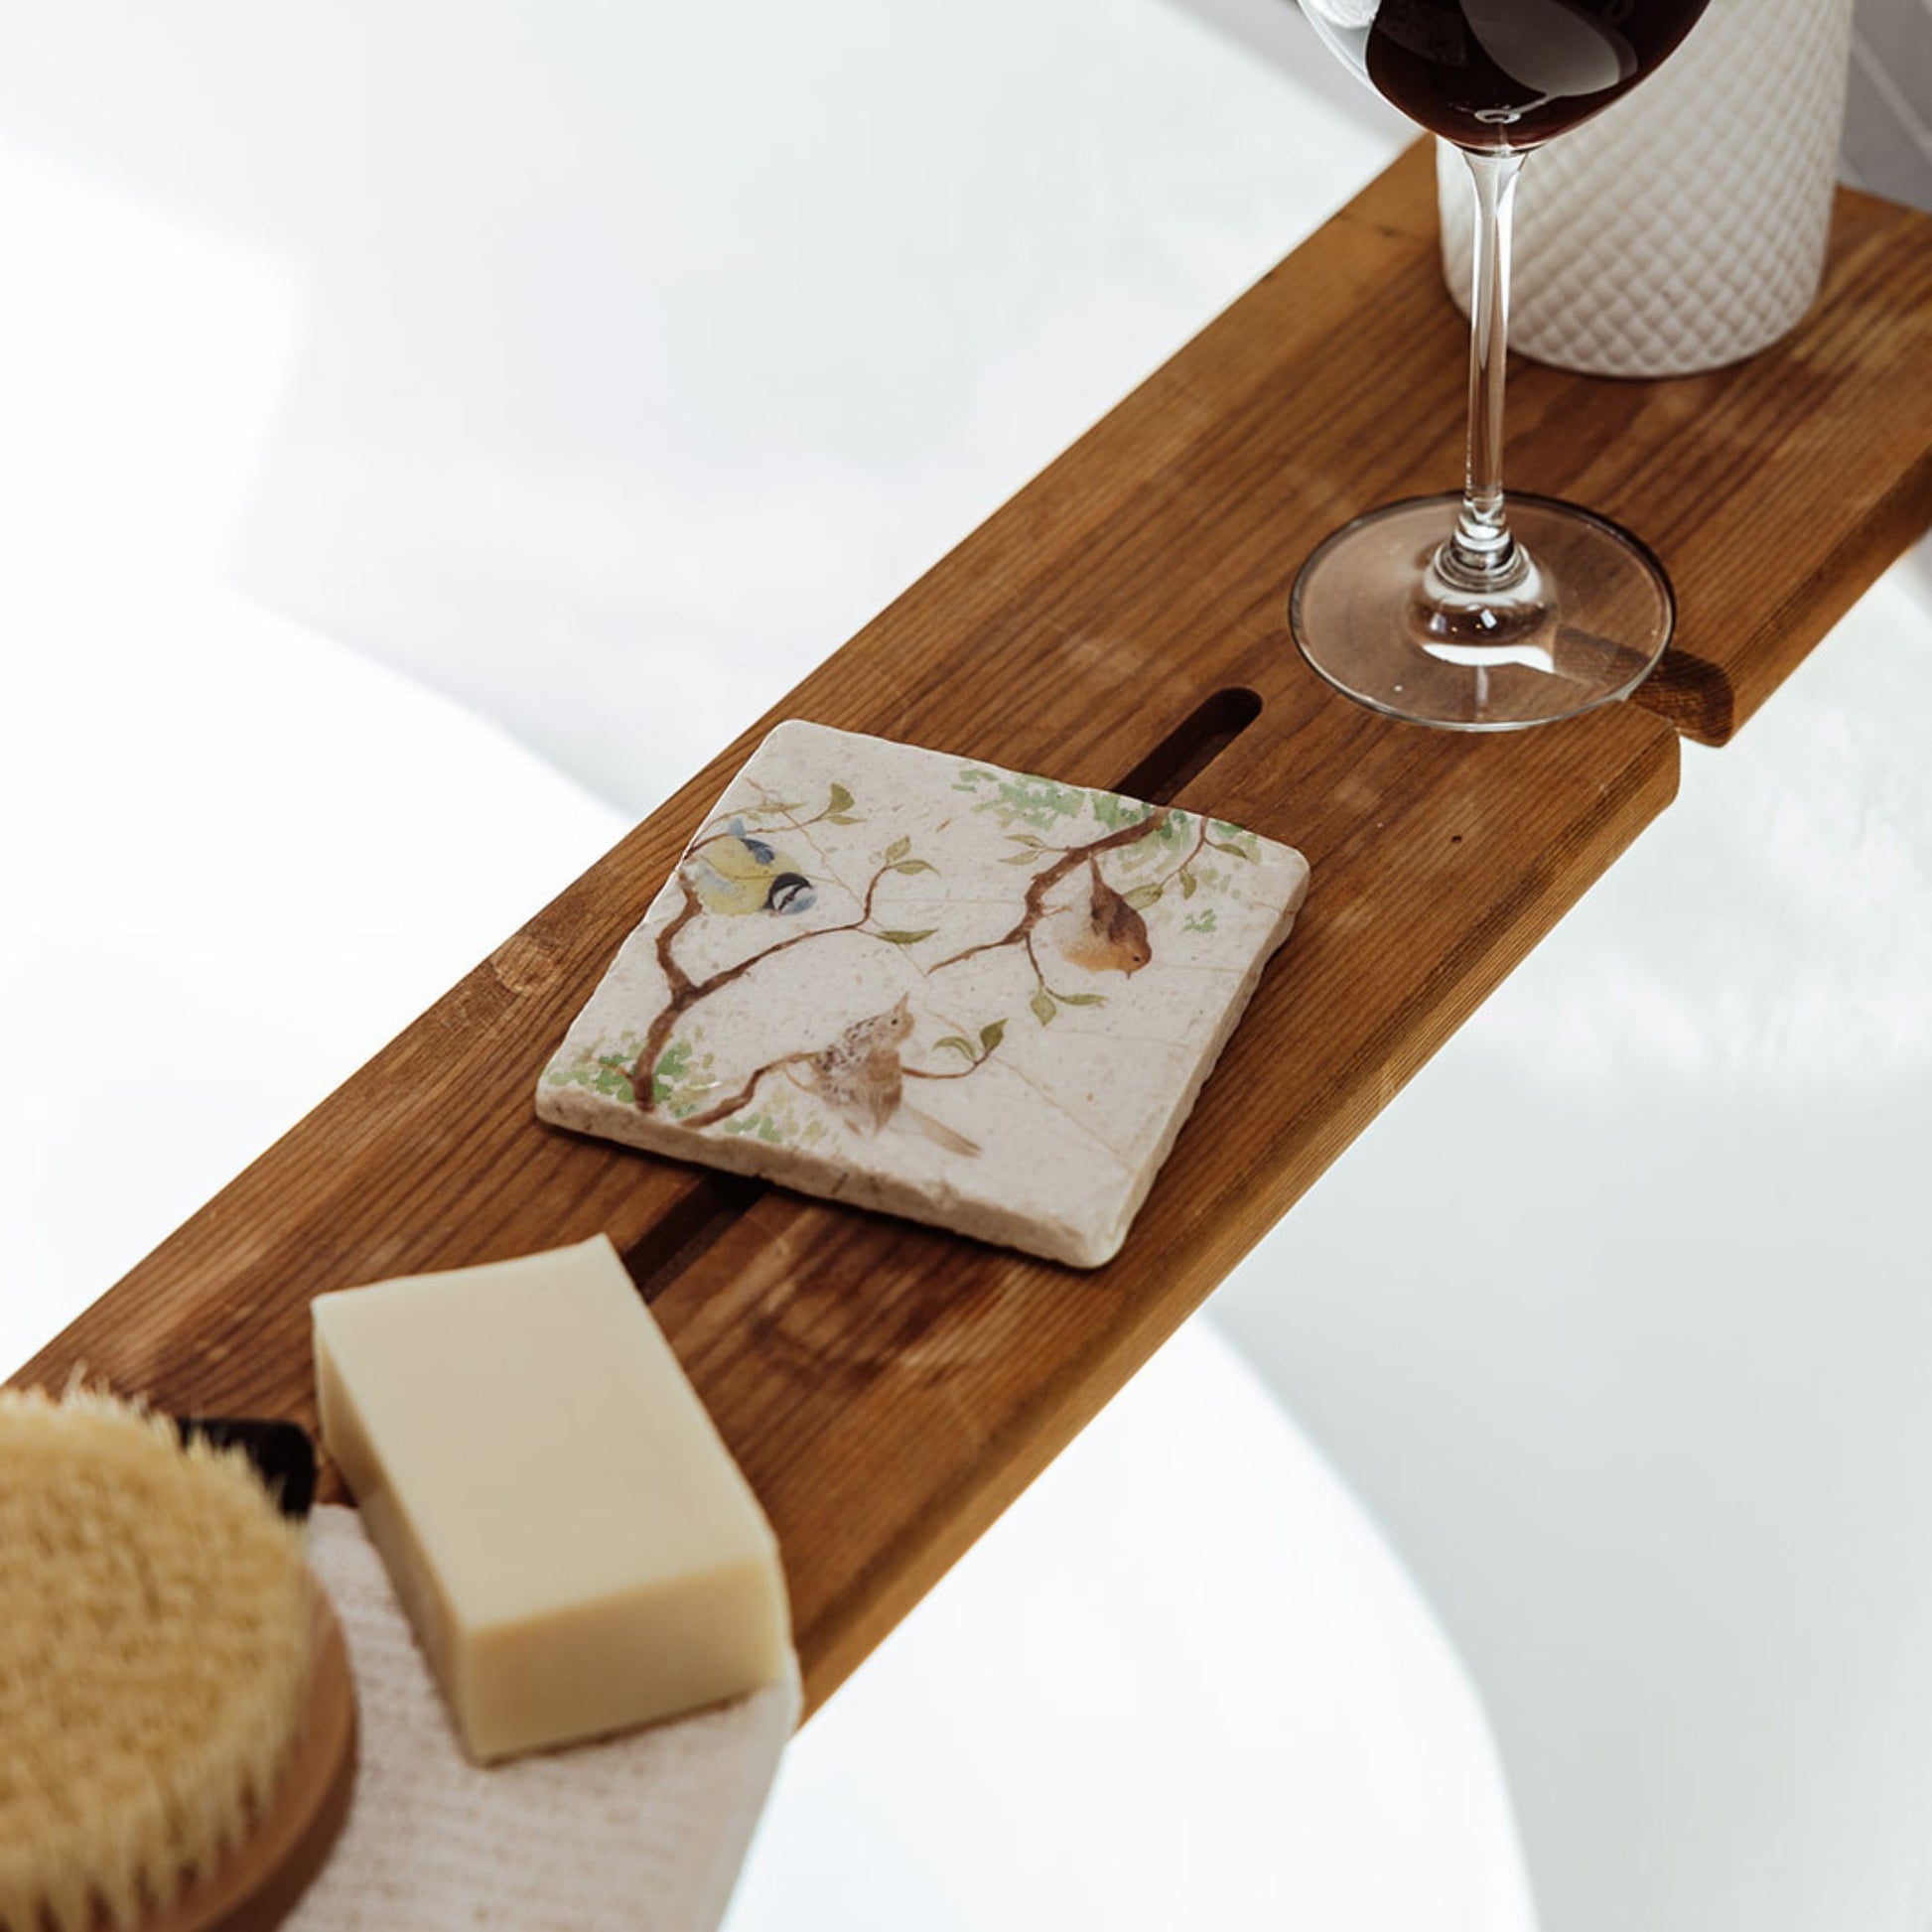 A square marble coaster on a wooden bath tidy above a bubble bath. The coaster features a watercolour design of garden birds in the hedgerow around a paddock gate.